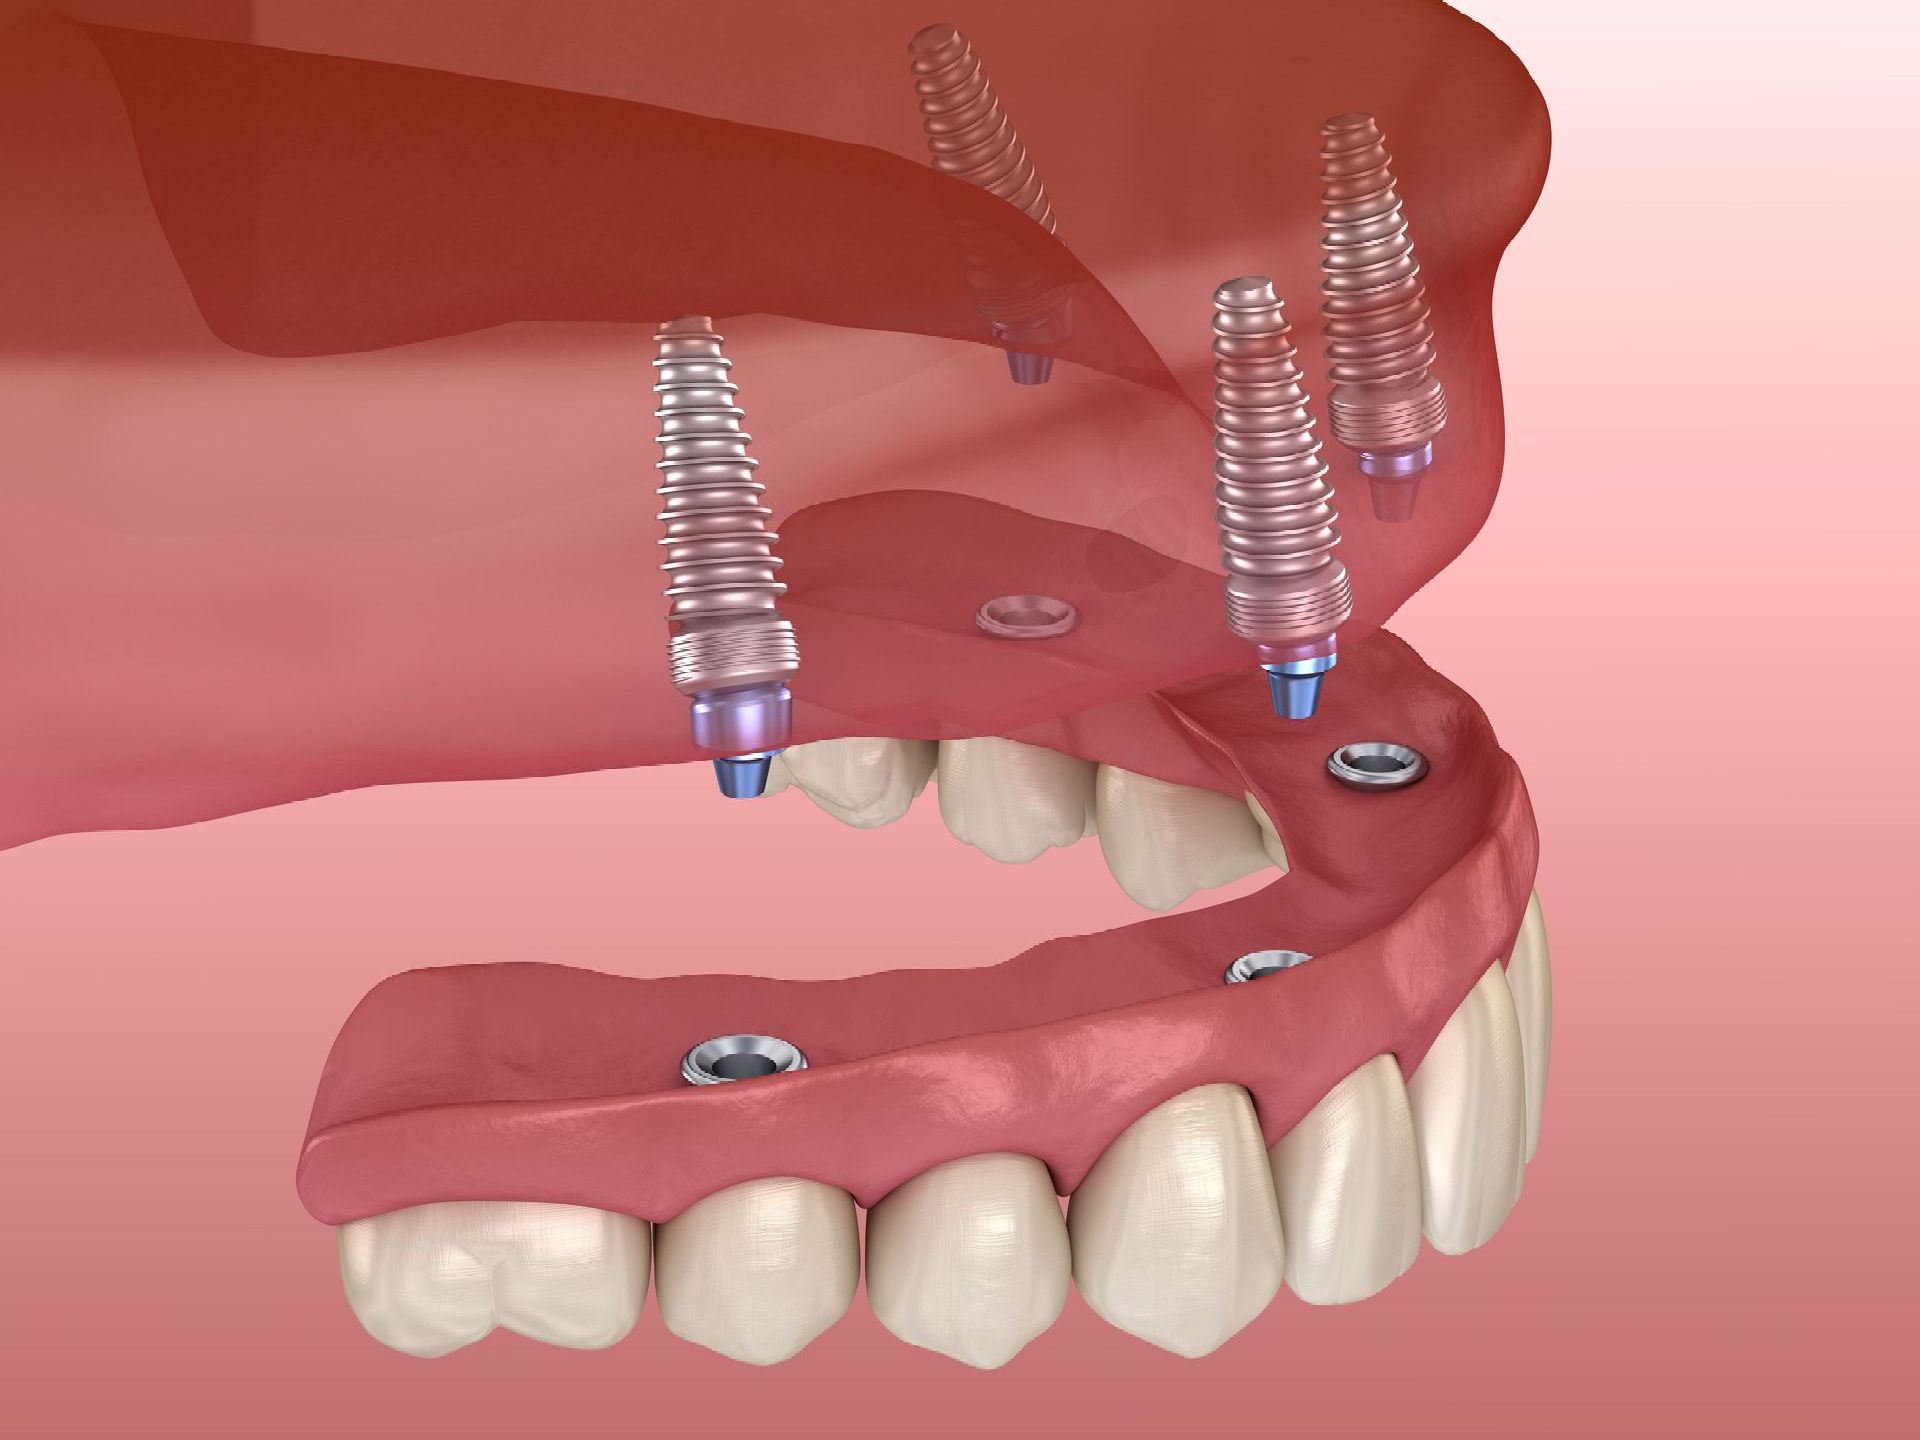 All-on-x implant